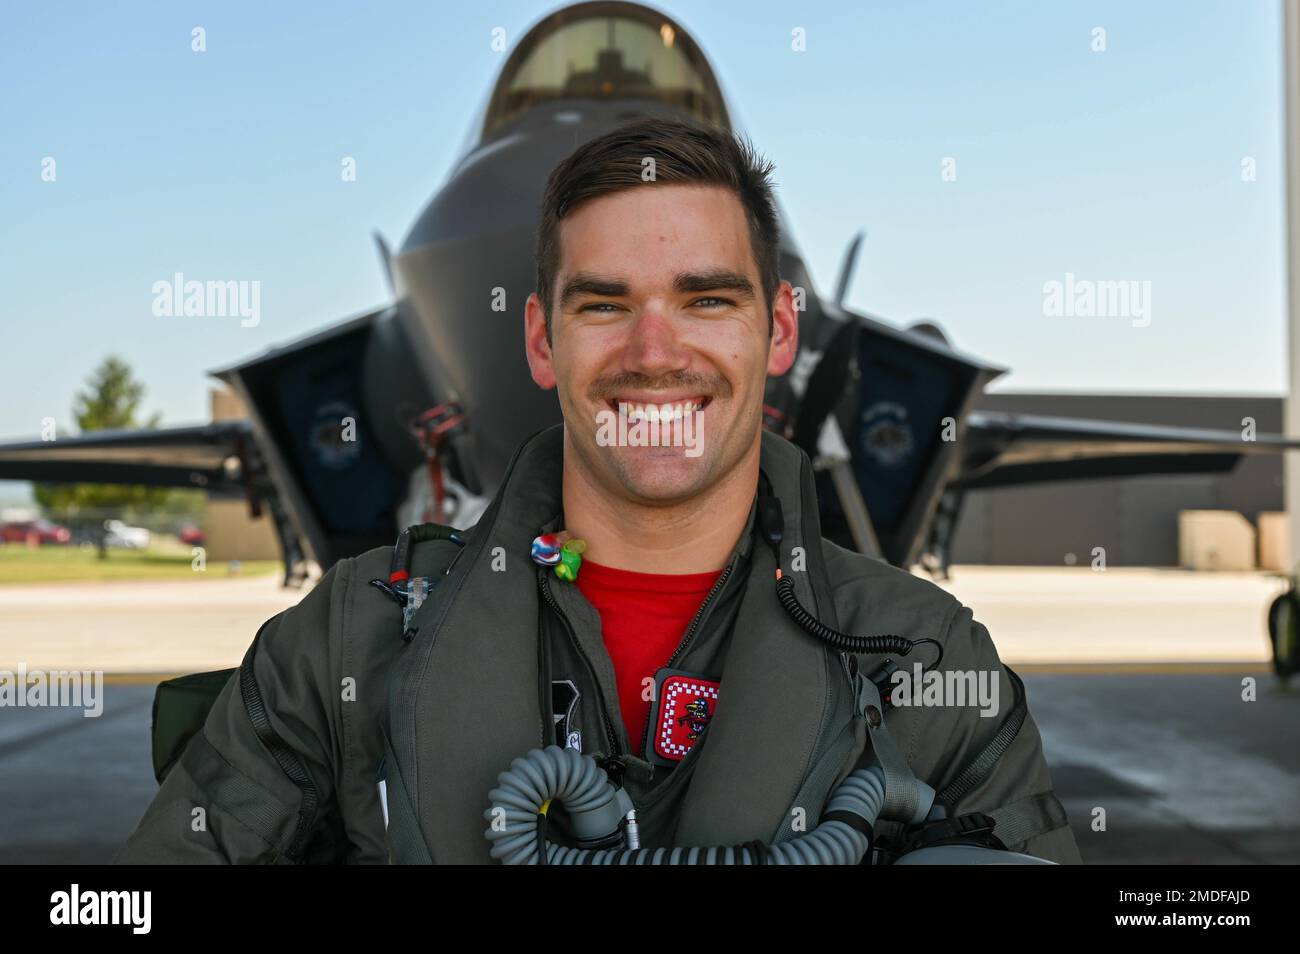 https://c8.alamy.com/comp/2MDFAJD/us-air-force-capt-alexander-babos-a-flight-commander-and-f-35a-lightning-ii-instructor-pilot-with-the-60th-fighter-squadron-33rd-fighter-wing-eglin-air-force-base-florida-prepares-for-a-flight-at-burlington-air-national-guard-base-vermont-july-22-2022-the-33rd-fw-is-utilizing-the-vermont-air-space-to-continue-effective-flying-operations-during-hazardous-summer-weather-in-florida-2MDFAJD.jpg